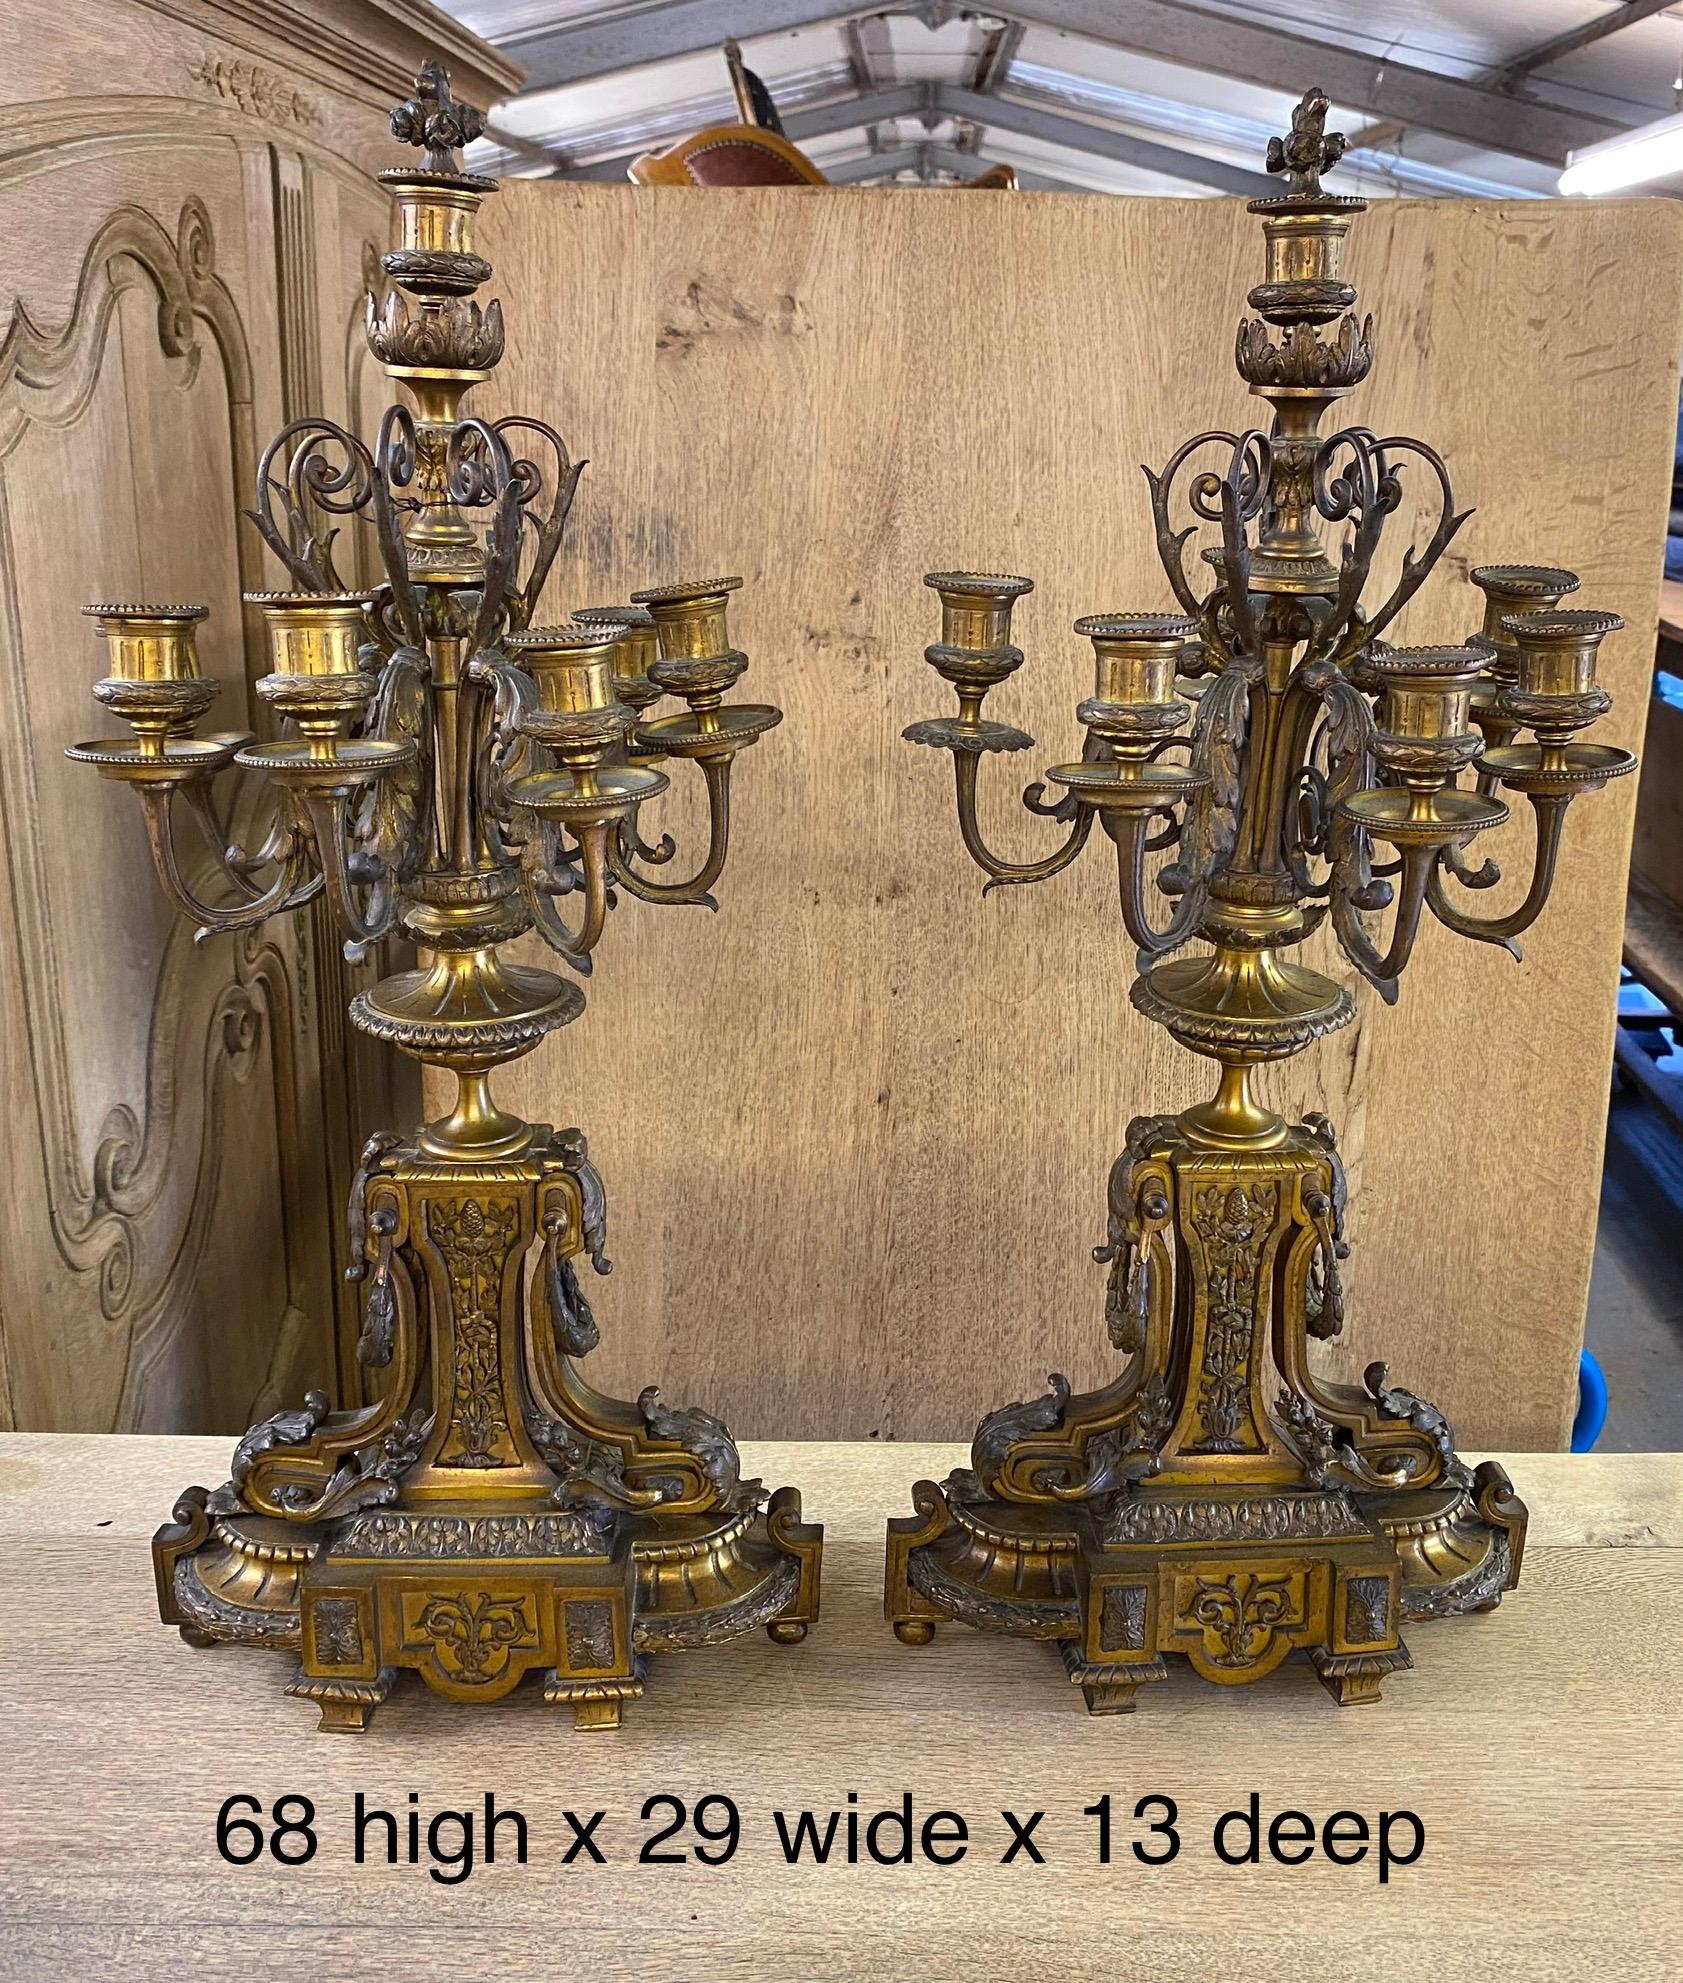 A fine quality large pair of gilt bronze candelabra dating to the 19th century. Each has 6 branches and a top central candleholder. They would benefit from a clean and tightening up of the screws but other than that in excellent original condition.